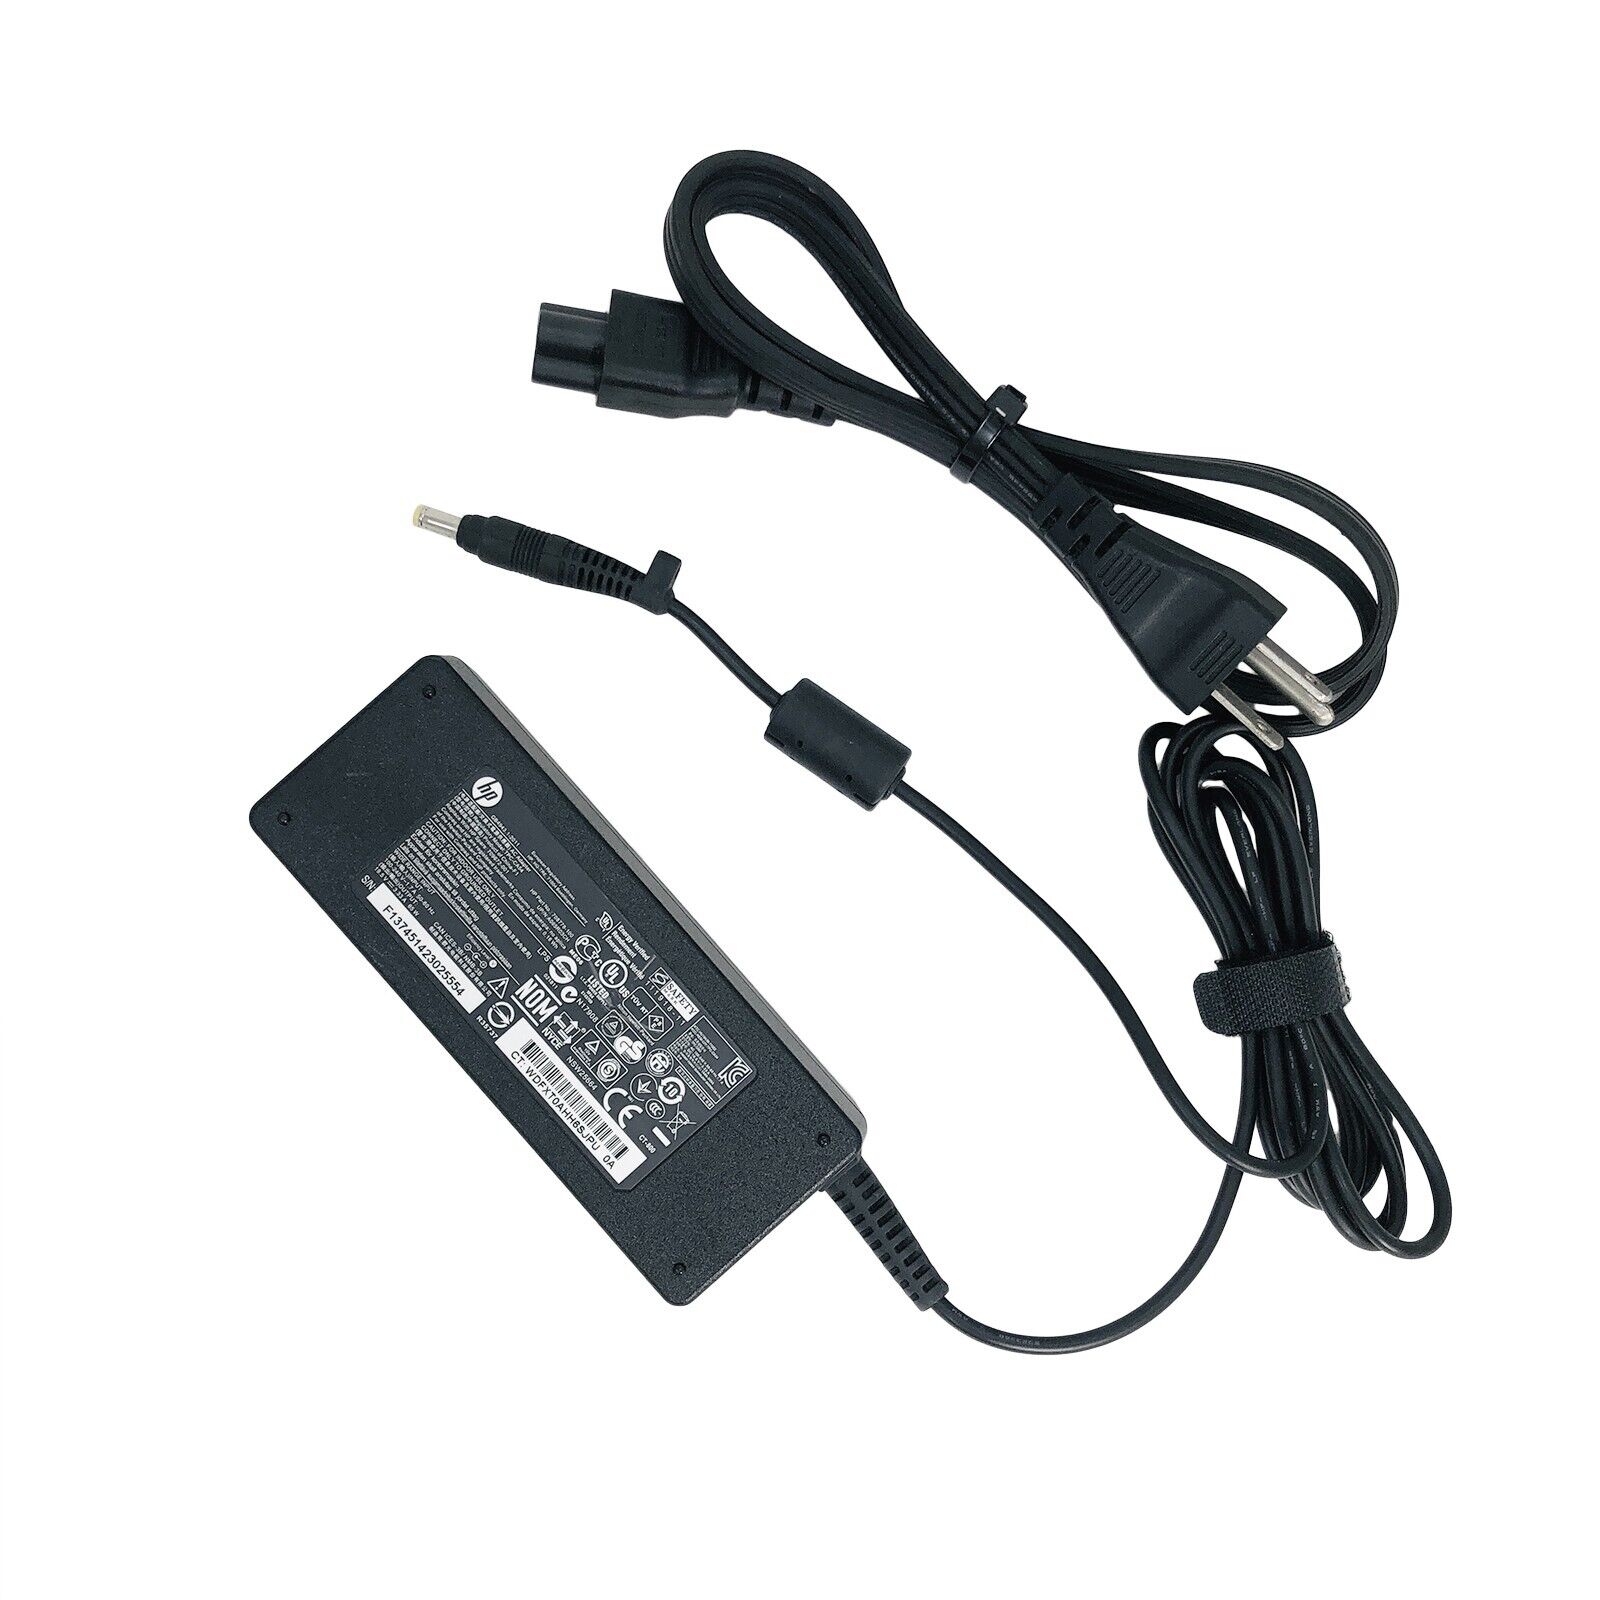 NEW Genuine 19.5V 3.33A HP AC DC Adapter for Thin Client T510 HSTNC-012-TC wCord